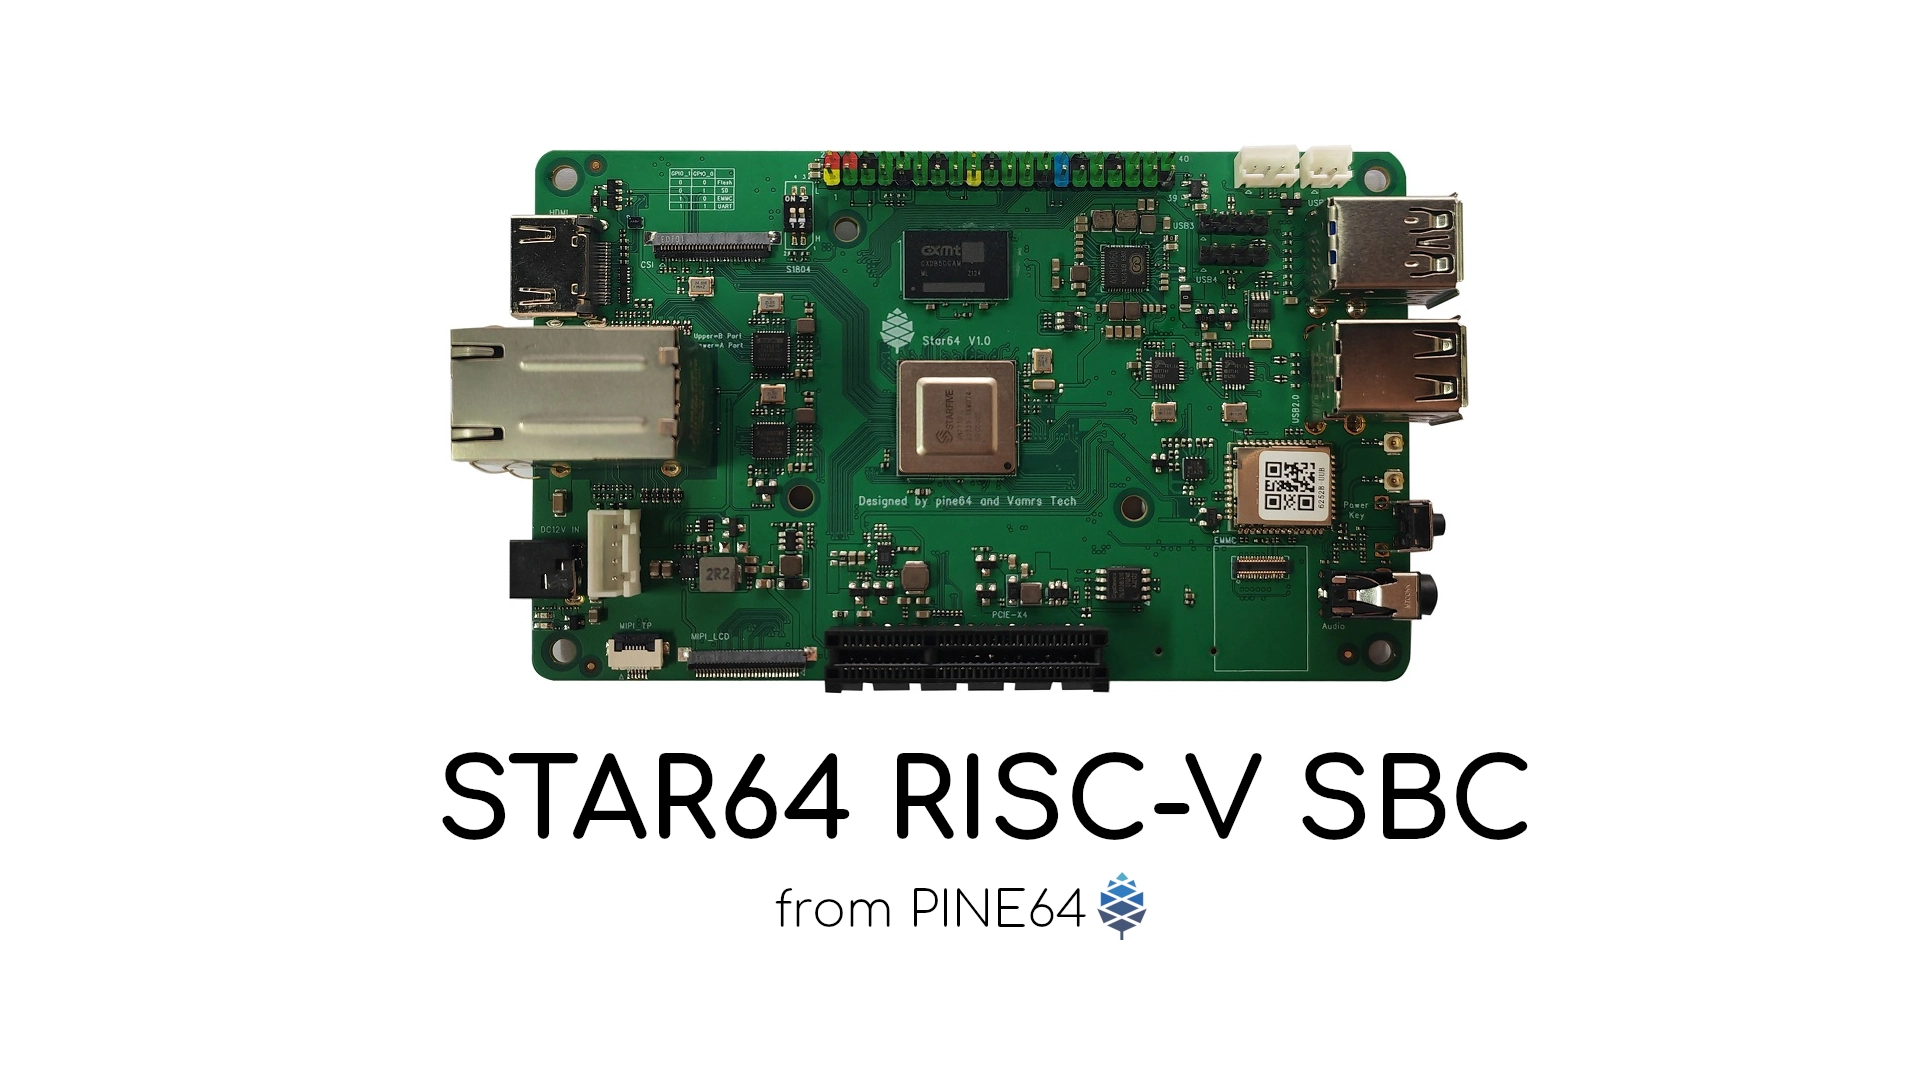 Star64 Is Now Available to Order as PINE64’s First RISC-V SBC